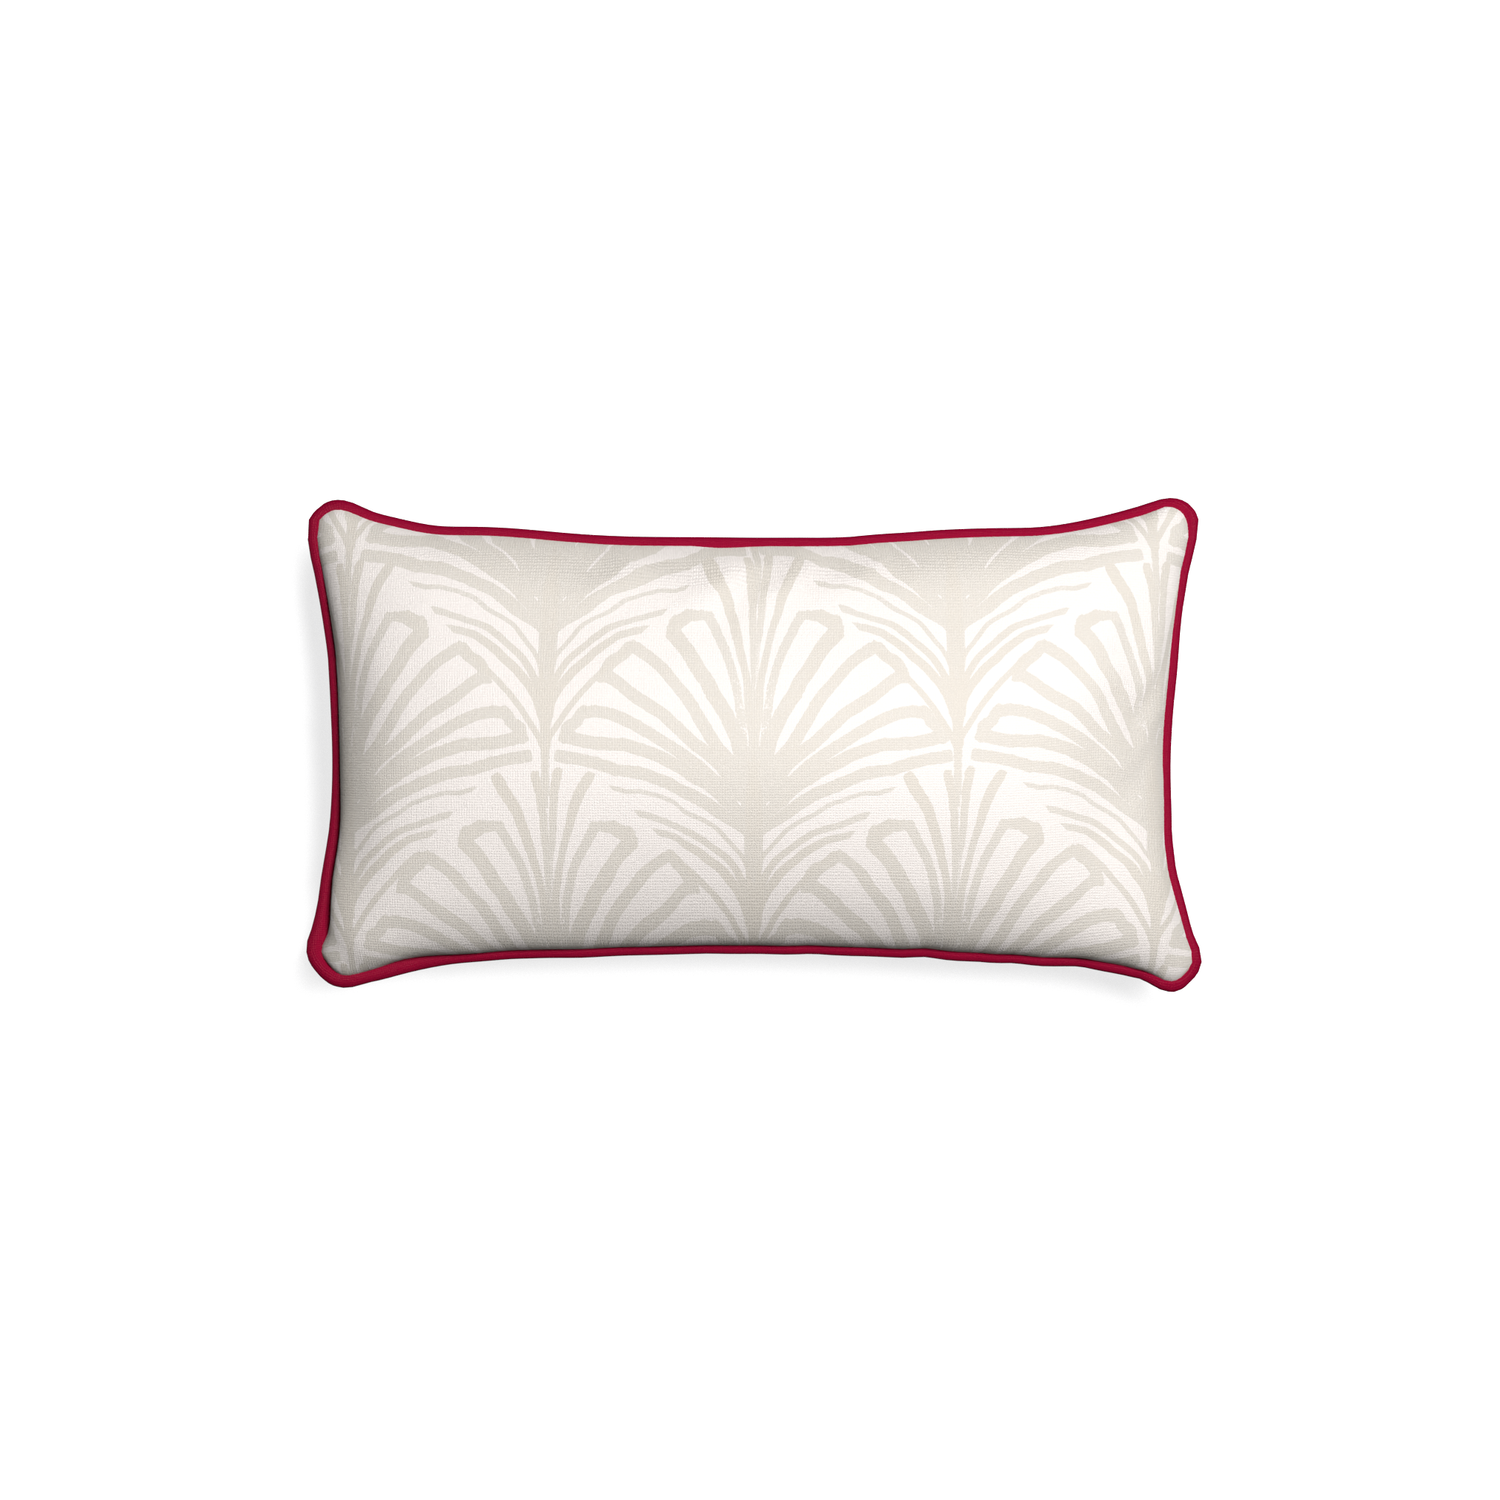 Petite-lumbar suzy sand custom beige palmpillow with raspberry piping on white background